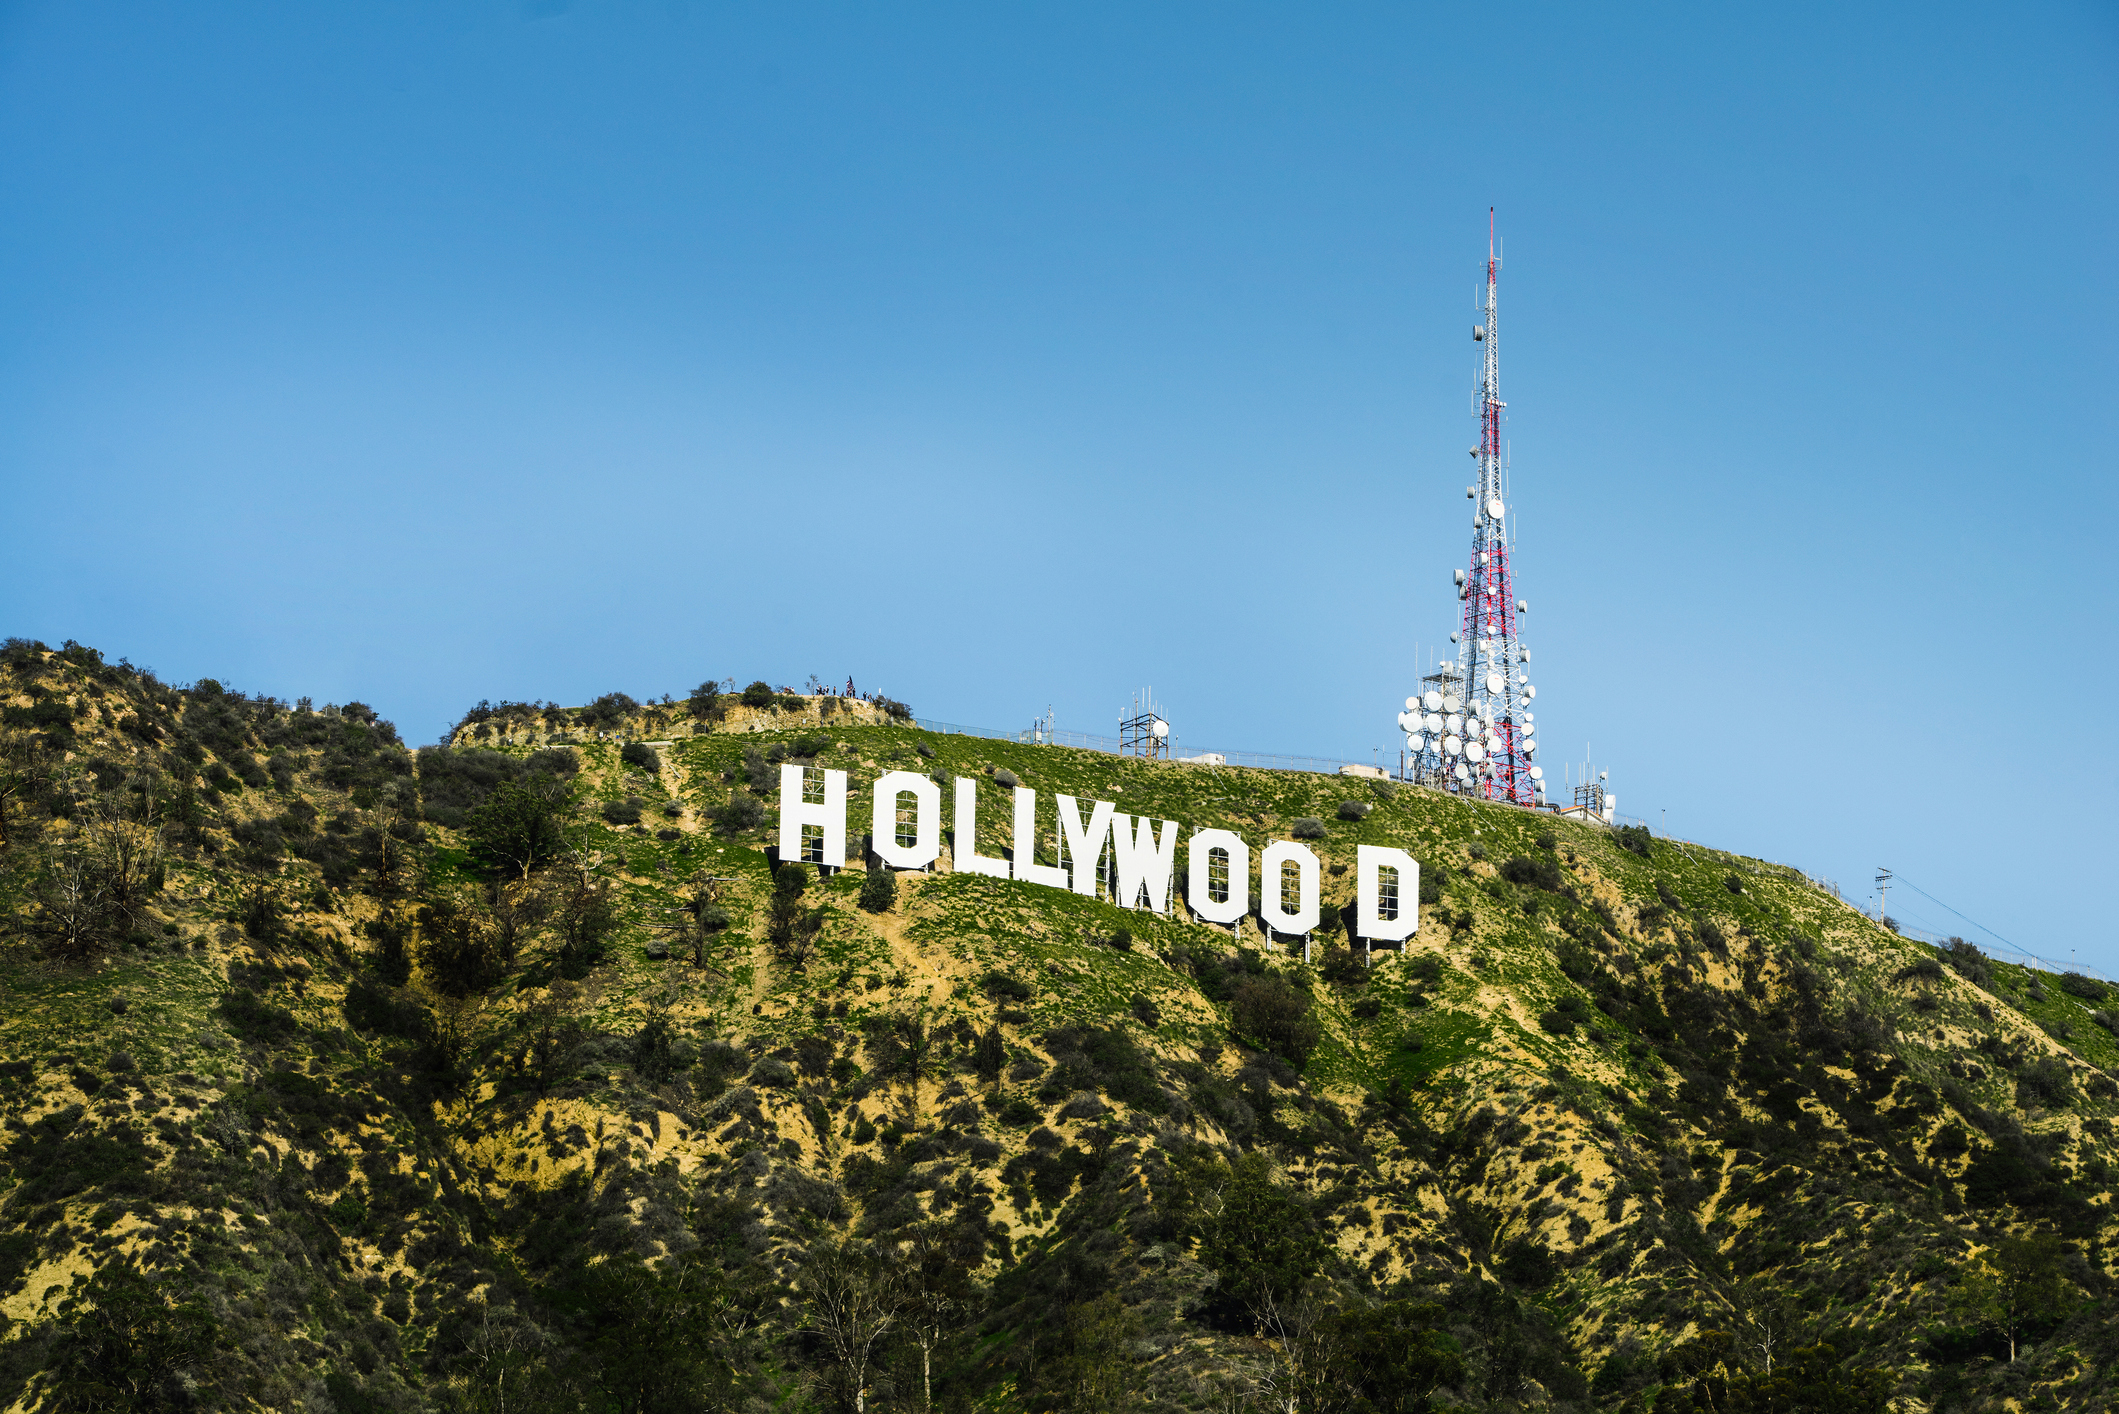 The image shows the iconic Hollywood sign on a hill, with a communication tower in the background, under a clear sky